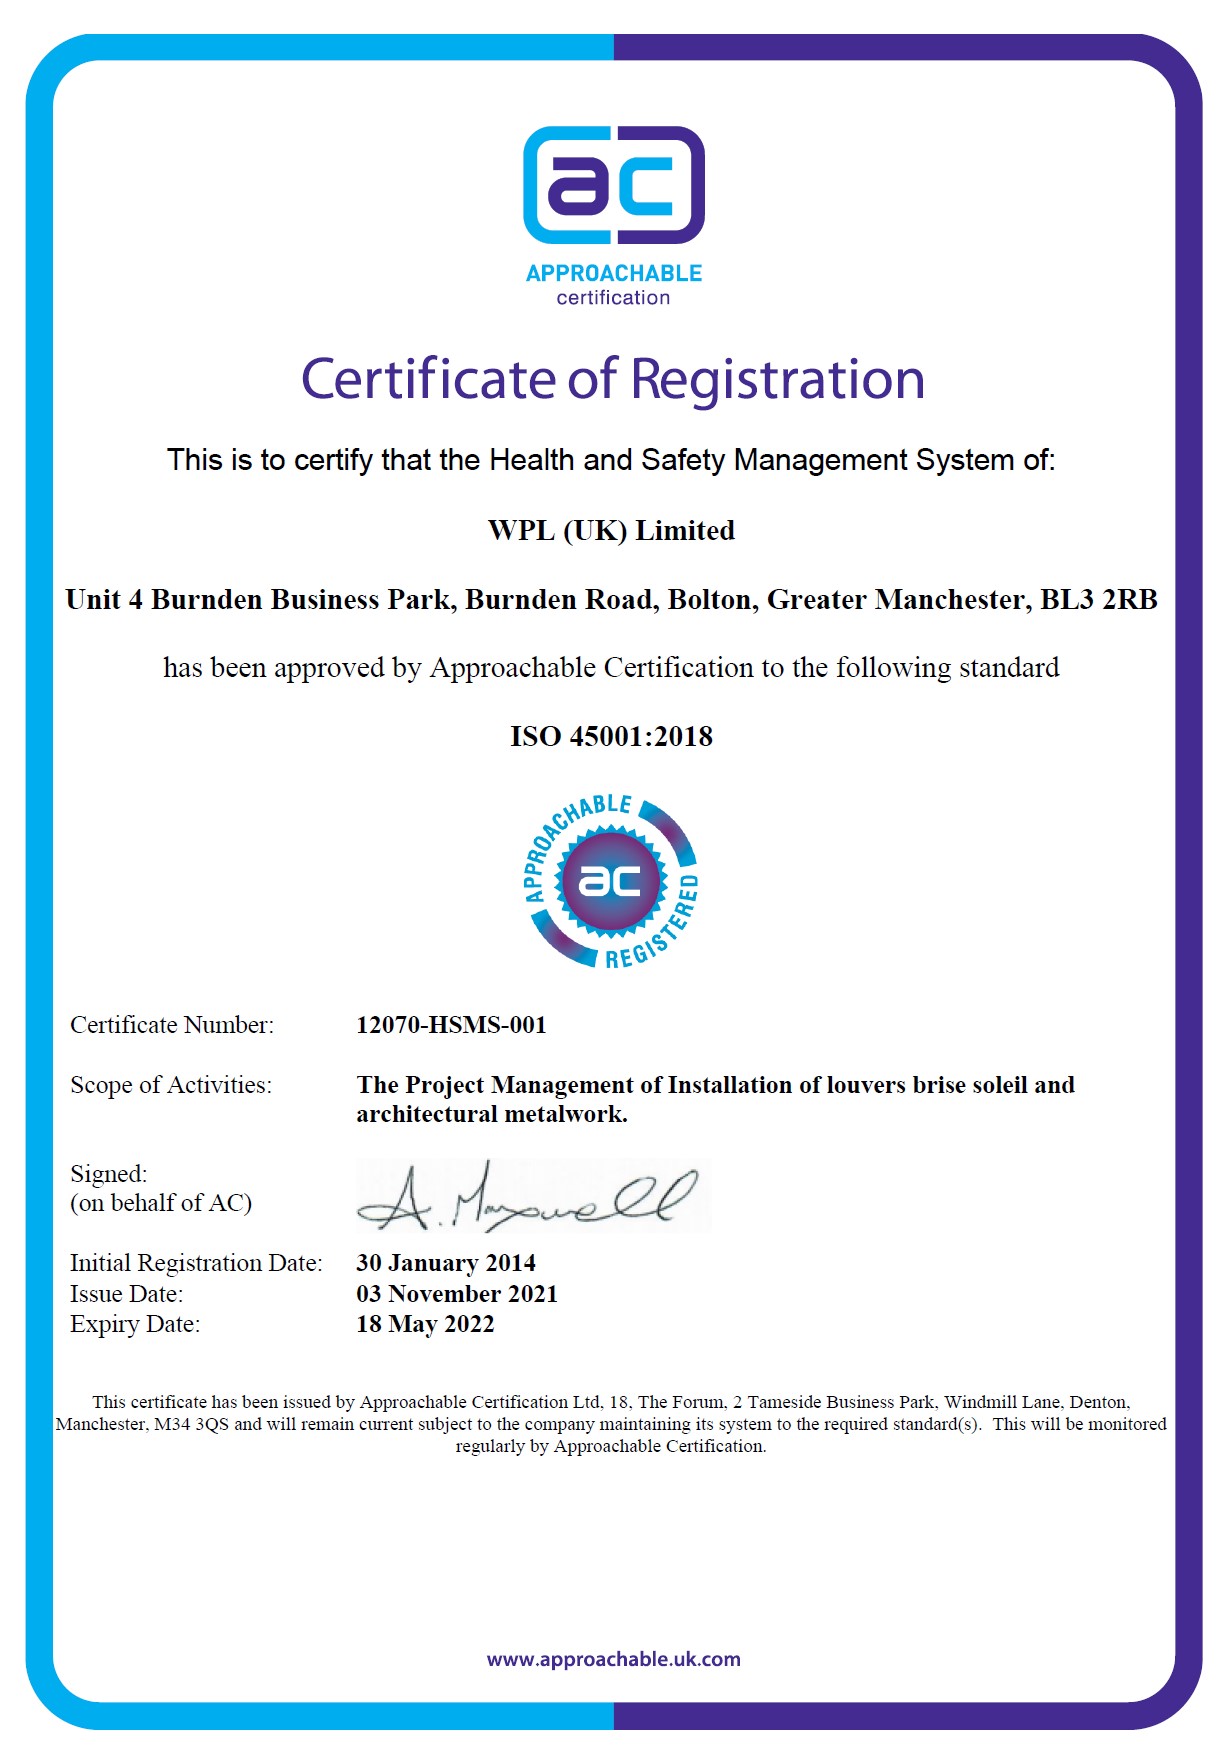 WPLUK ISO 45001 2018 Certification to 18th May 2022